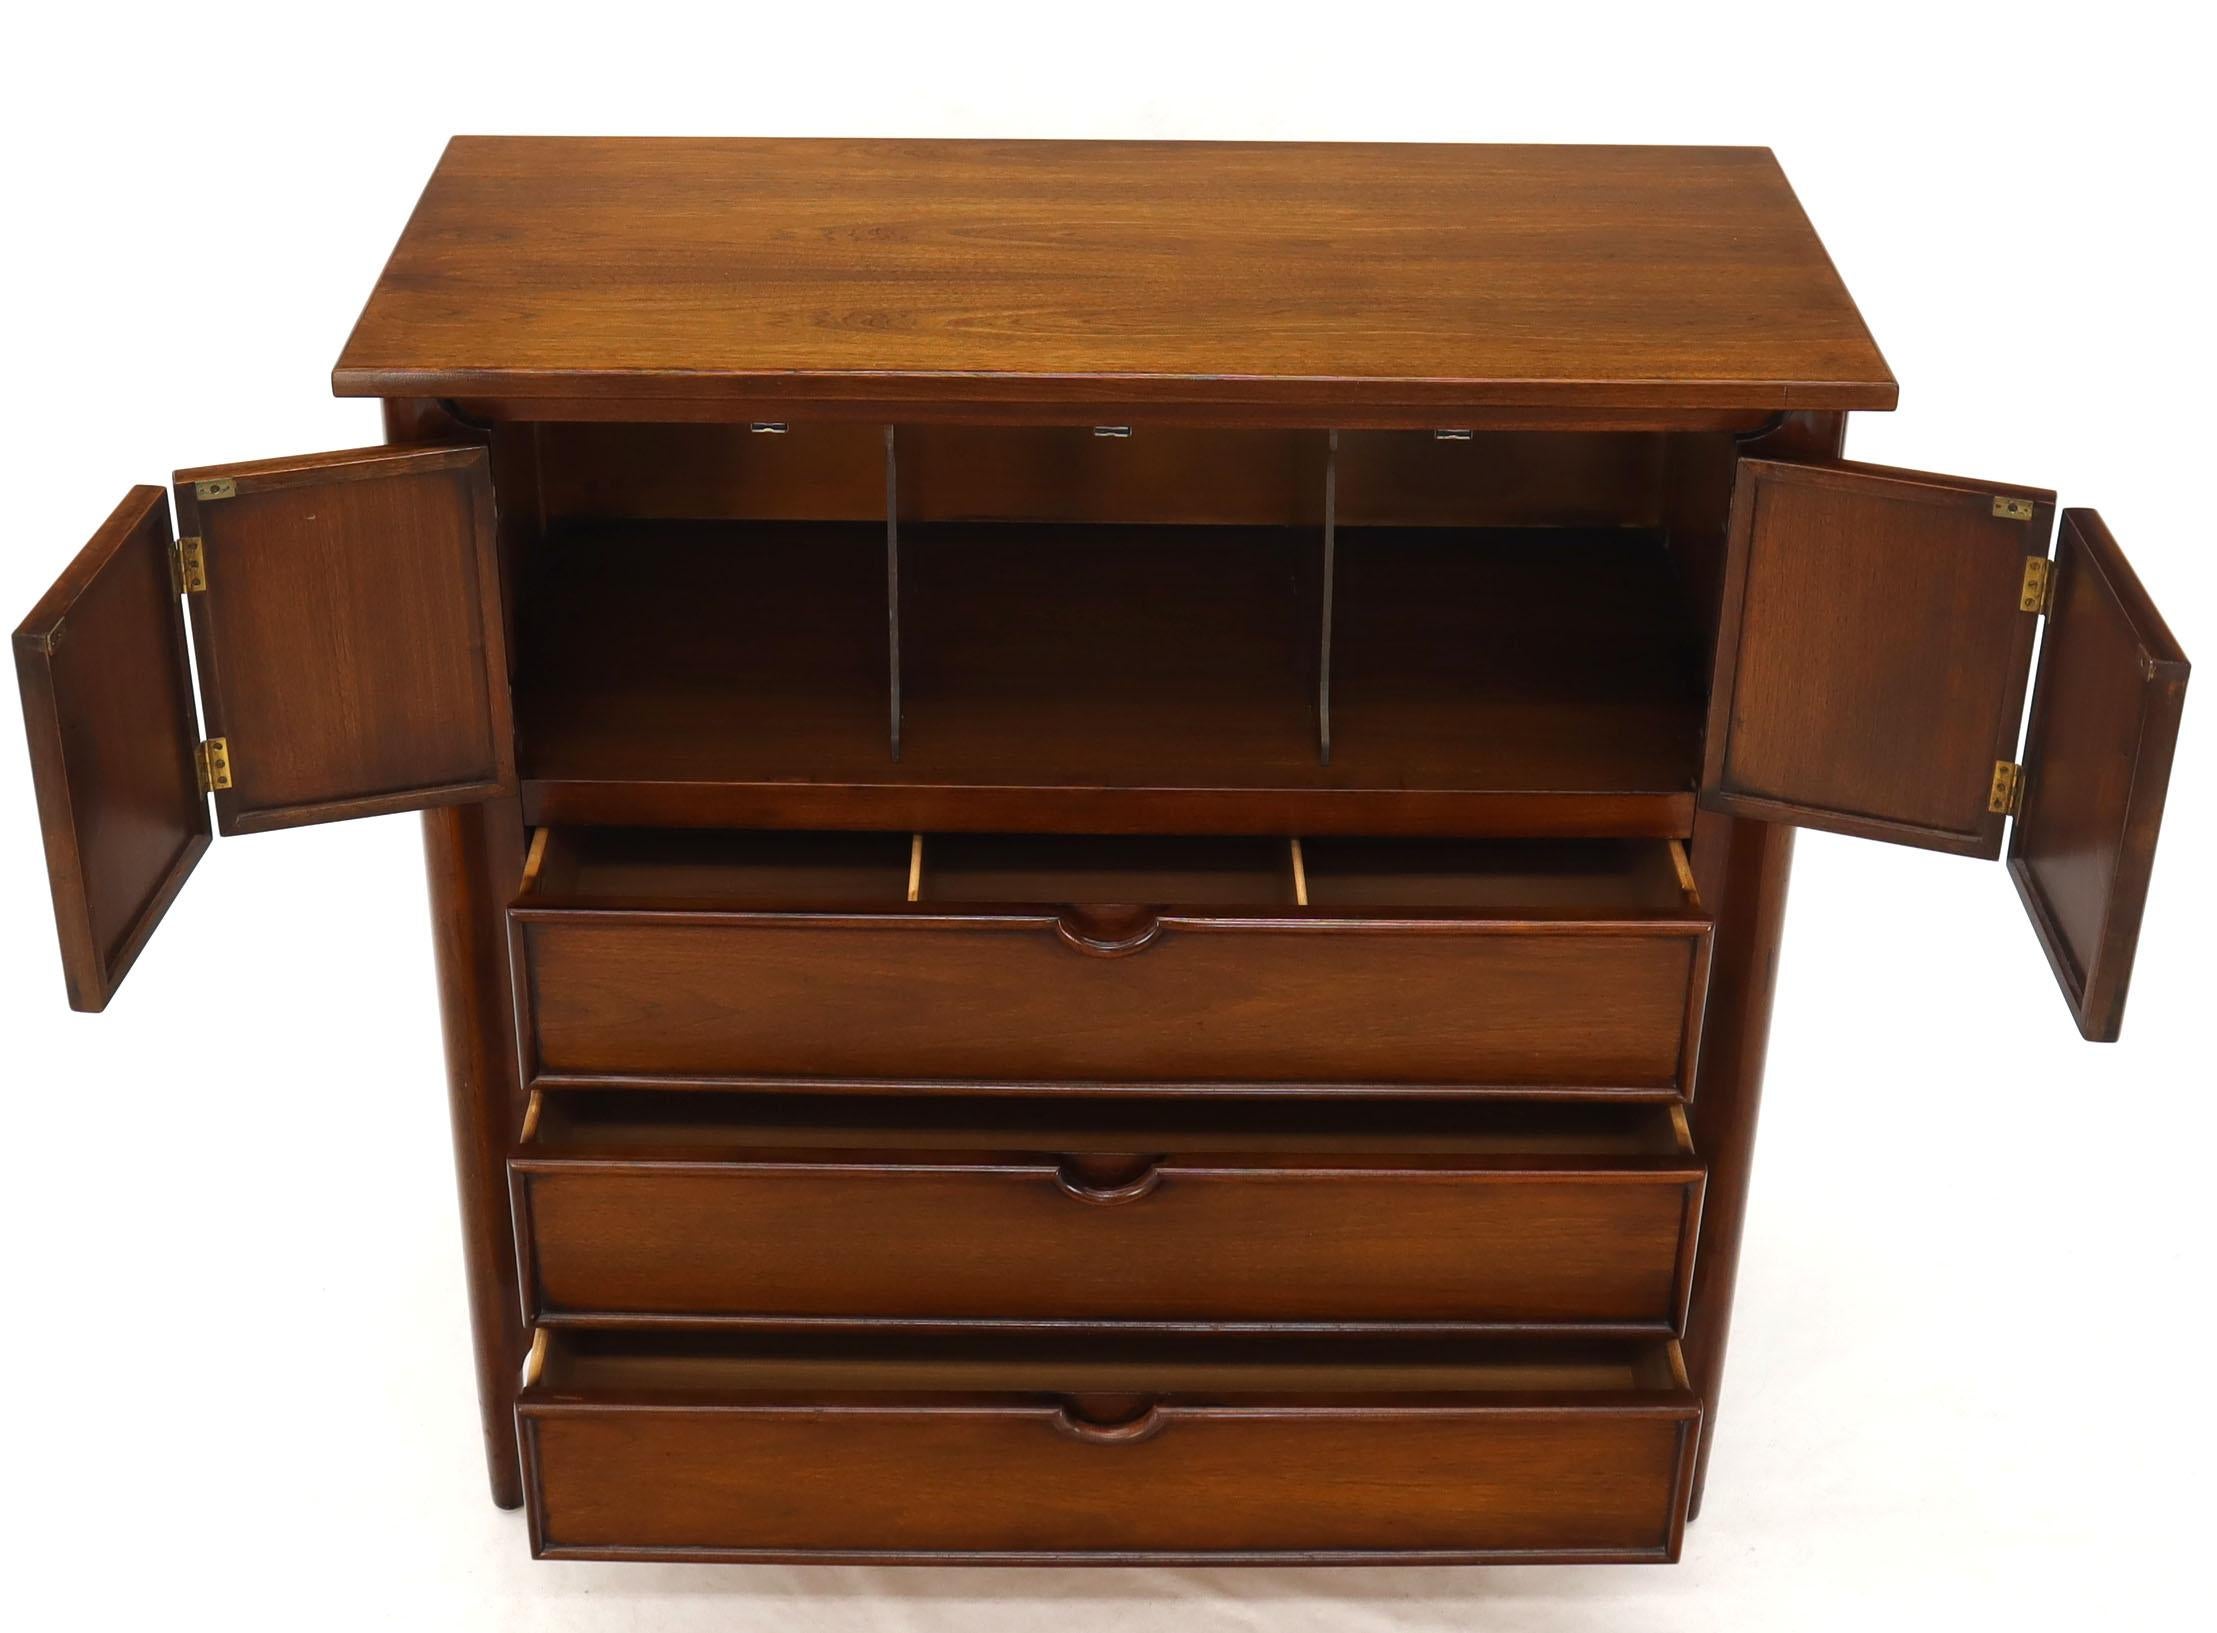 Mid-Century Modern walnut high chest dresser with beautiful exposed sculpted solid walnut legs. Two folding double doors linens compartment with dividers. Nicely sculpted pulls and trim work around the drawers and doors.